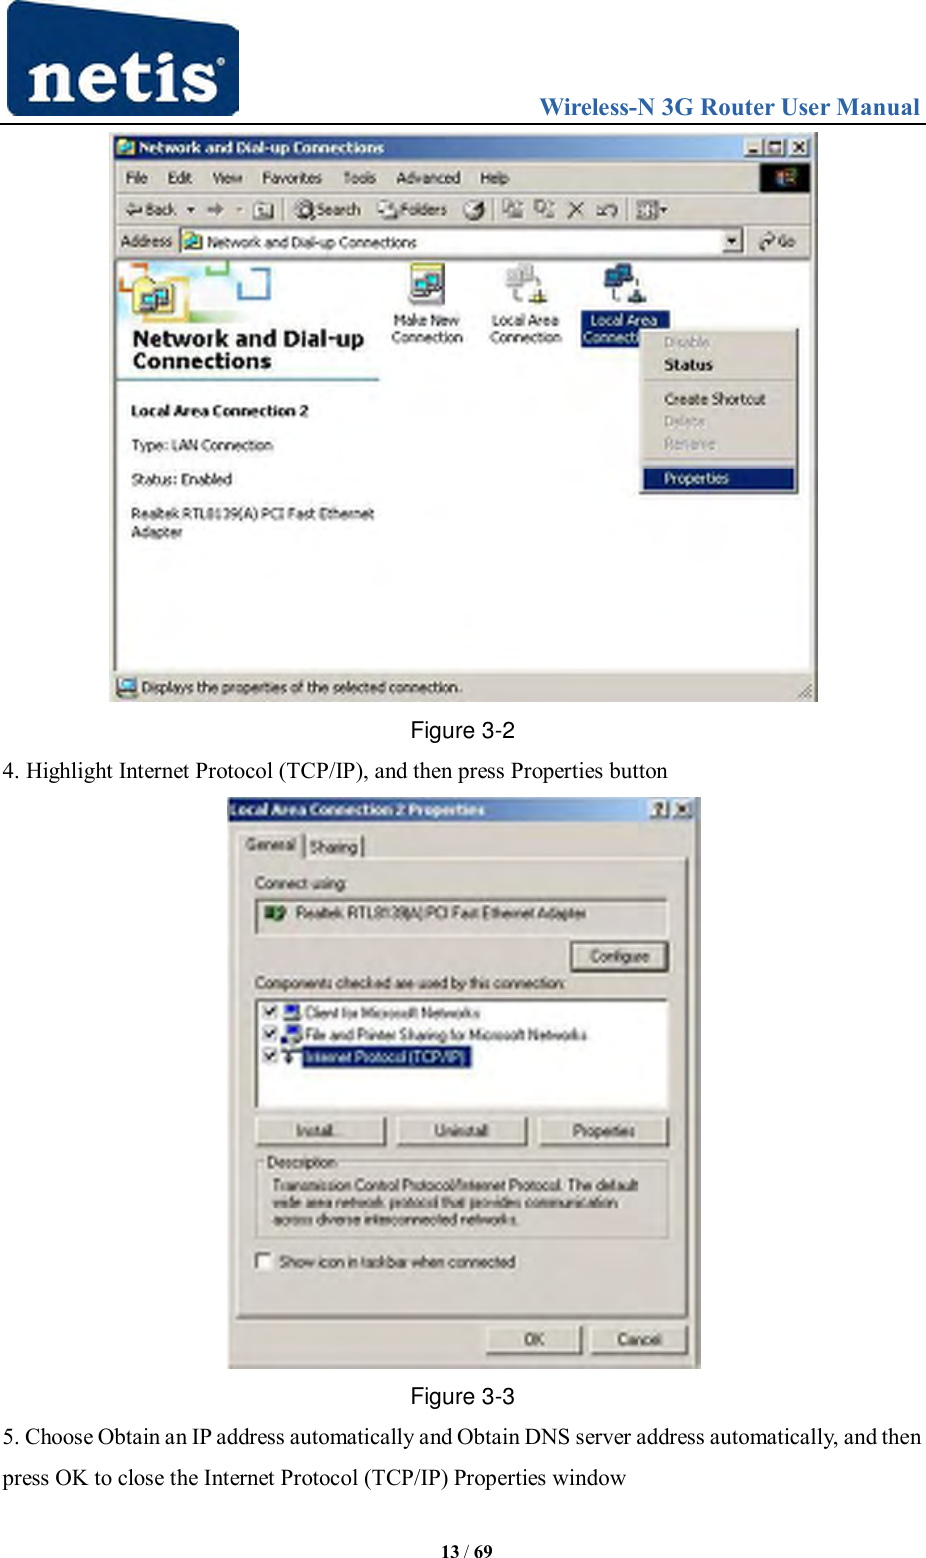                                 Wireless-N 3G Router User Manual  13 / 69  Figure 3-2 4. Highlight Internet Protocol (TCP/IP), and then press Properties button  Figure 3-3 5. Choose Obtain an IP address automatically and Obtain DNS server address automatically, and then press OK to close the Internet Protocol (TCP/IP) Properties window 